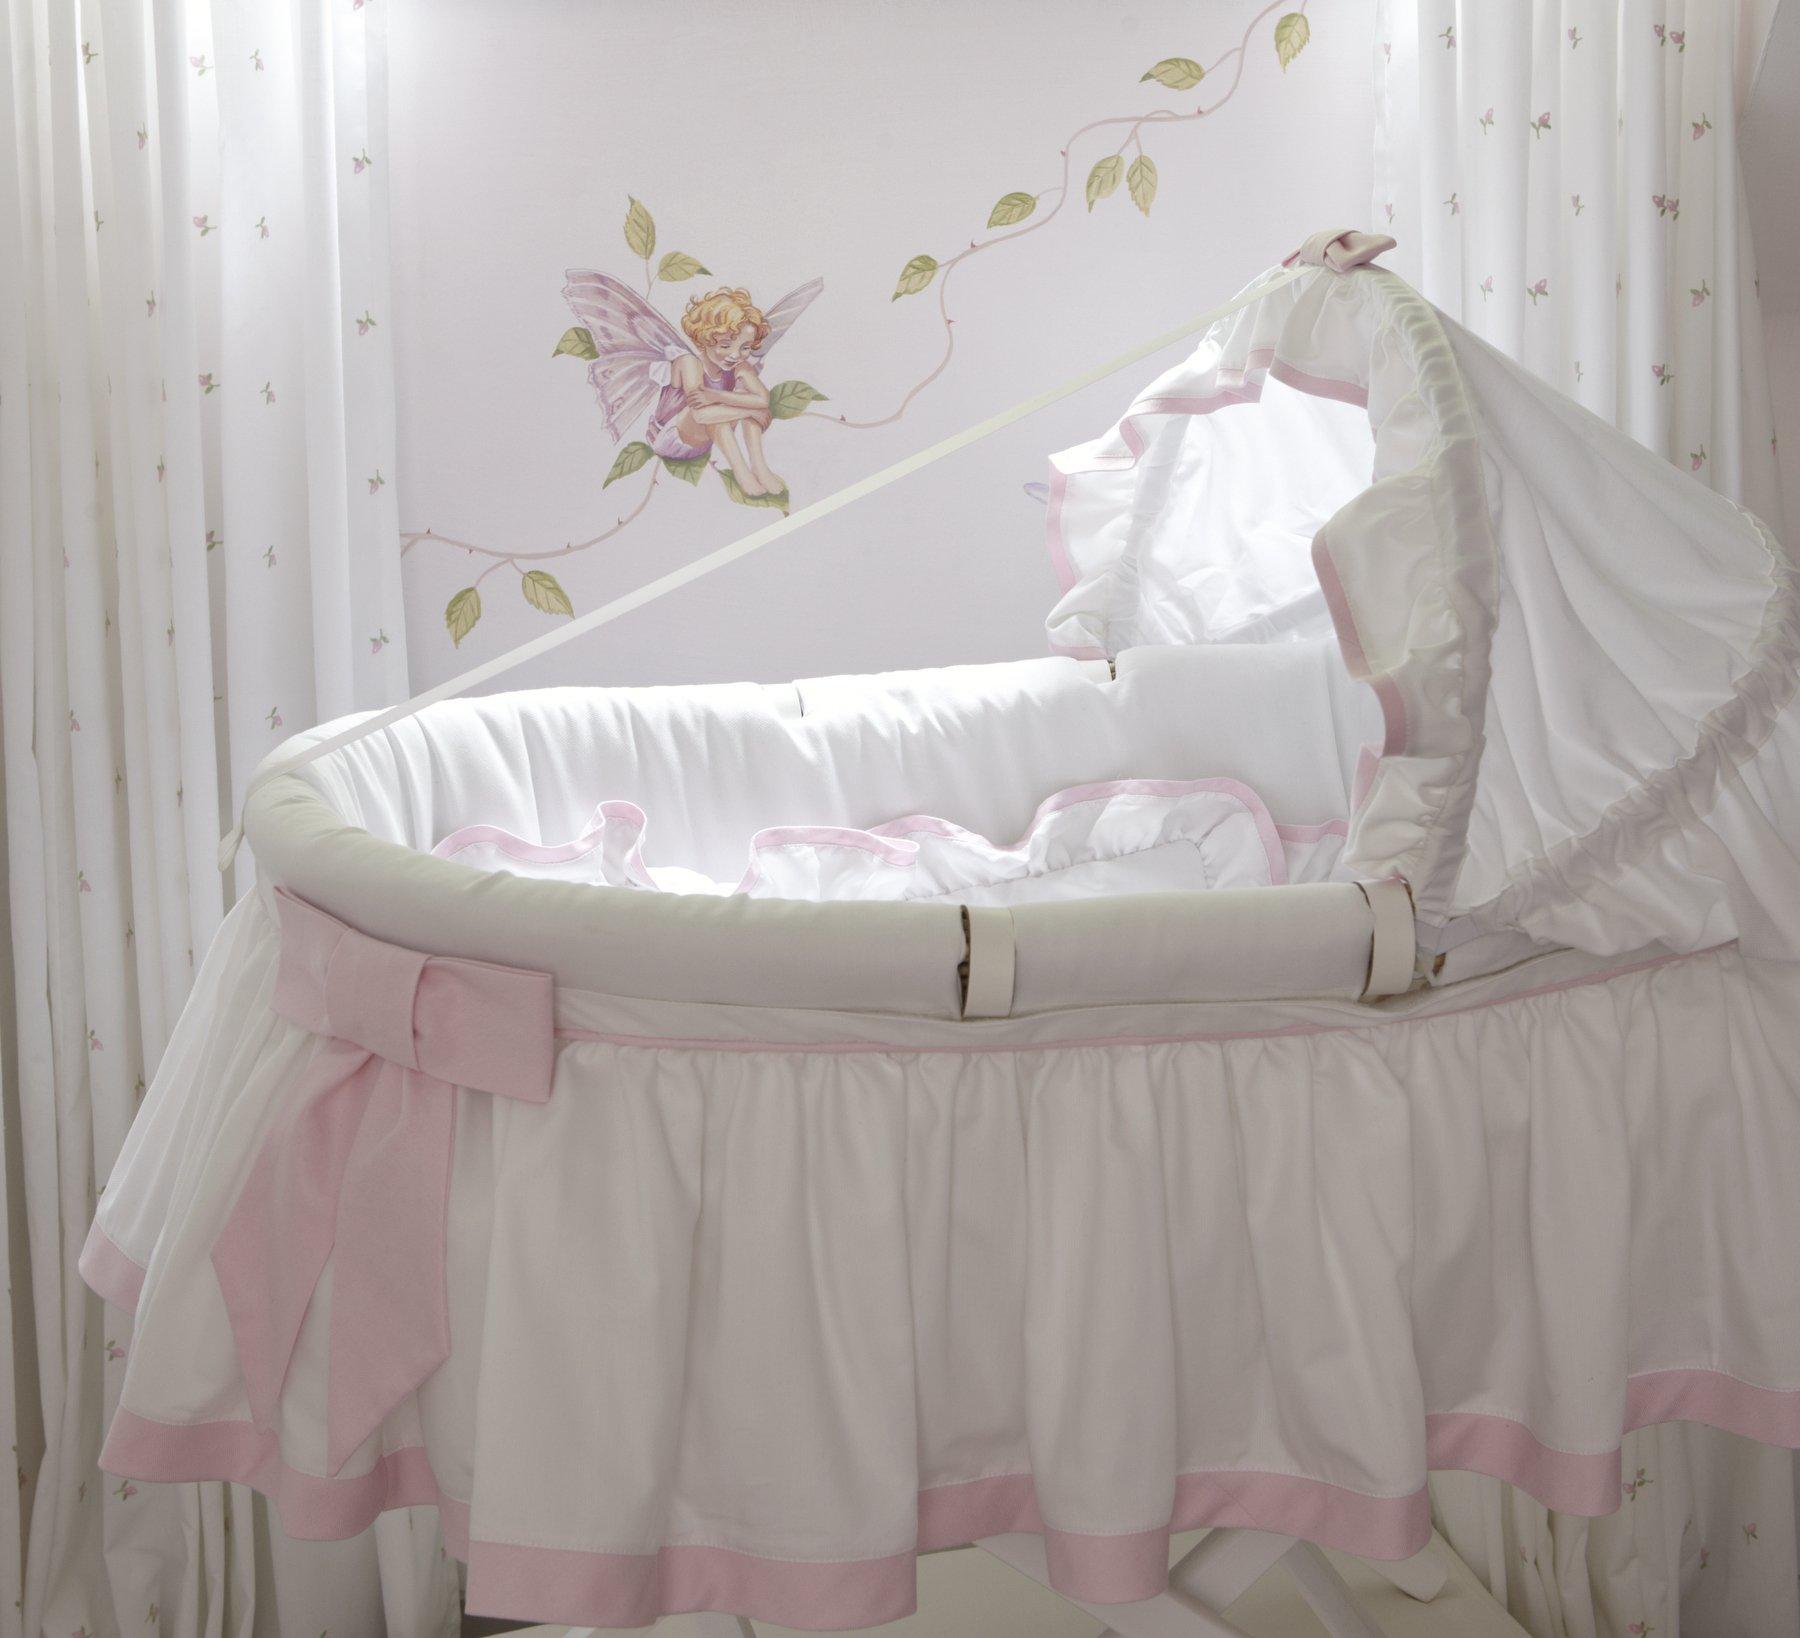 Dragons Moses Basket with a Classic Skirt - Moses Basket with Hood in Plain Pink